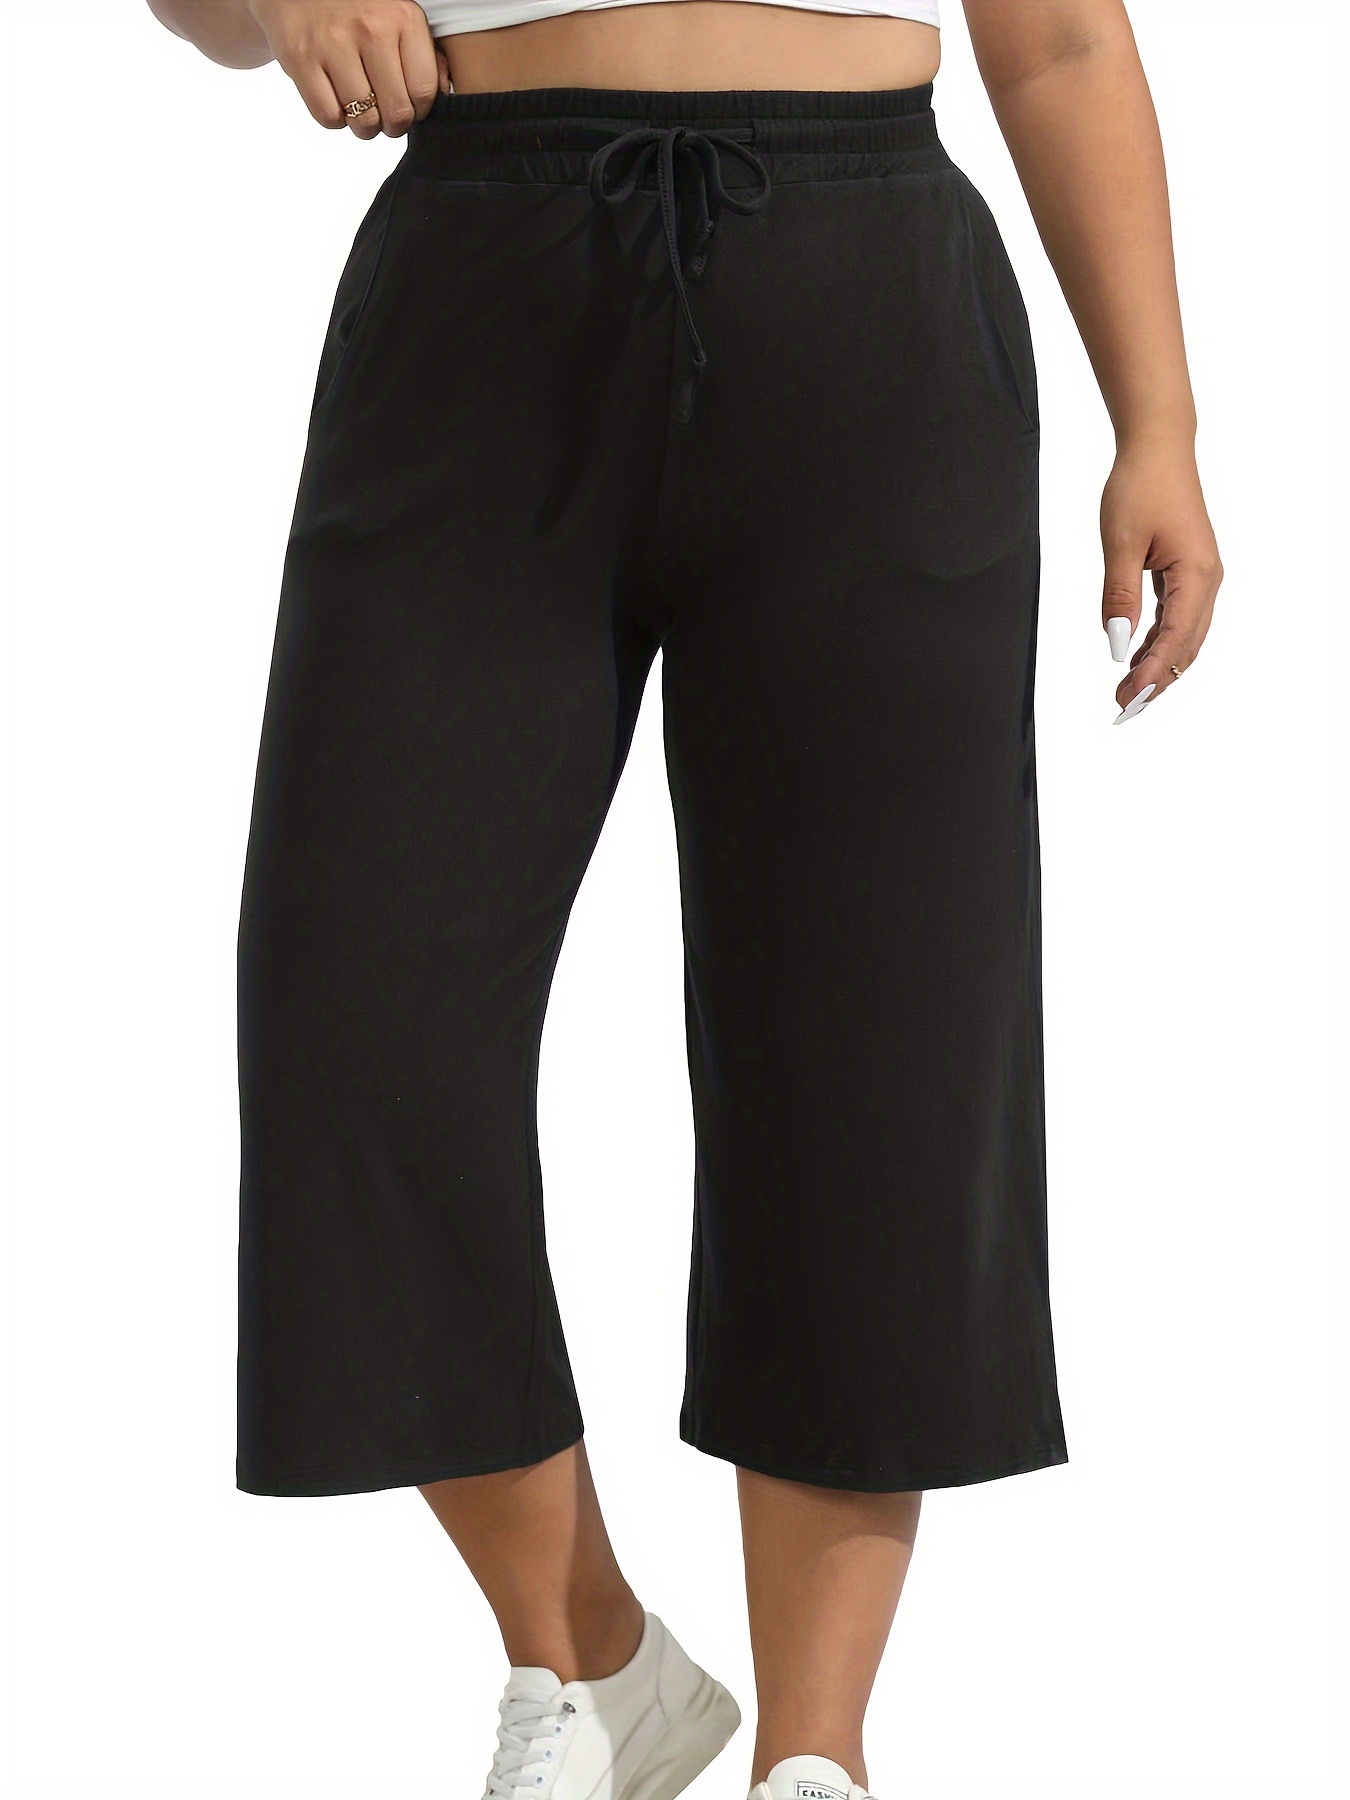 HDE Pull On Capri Pants For Women with Pockets Elastic Waist Cropped Pants  Black - XXL